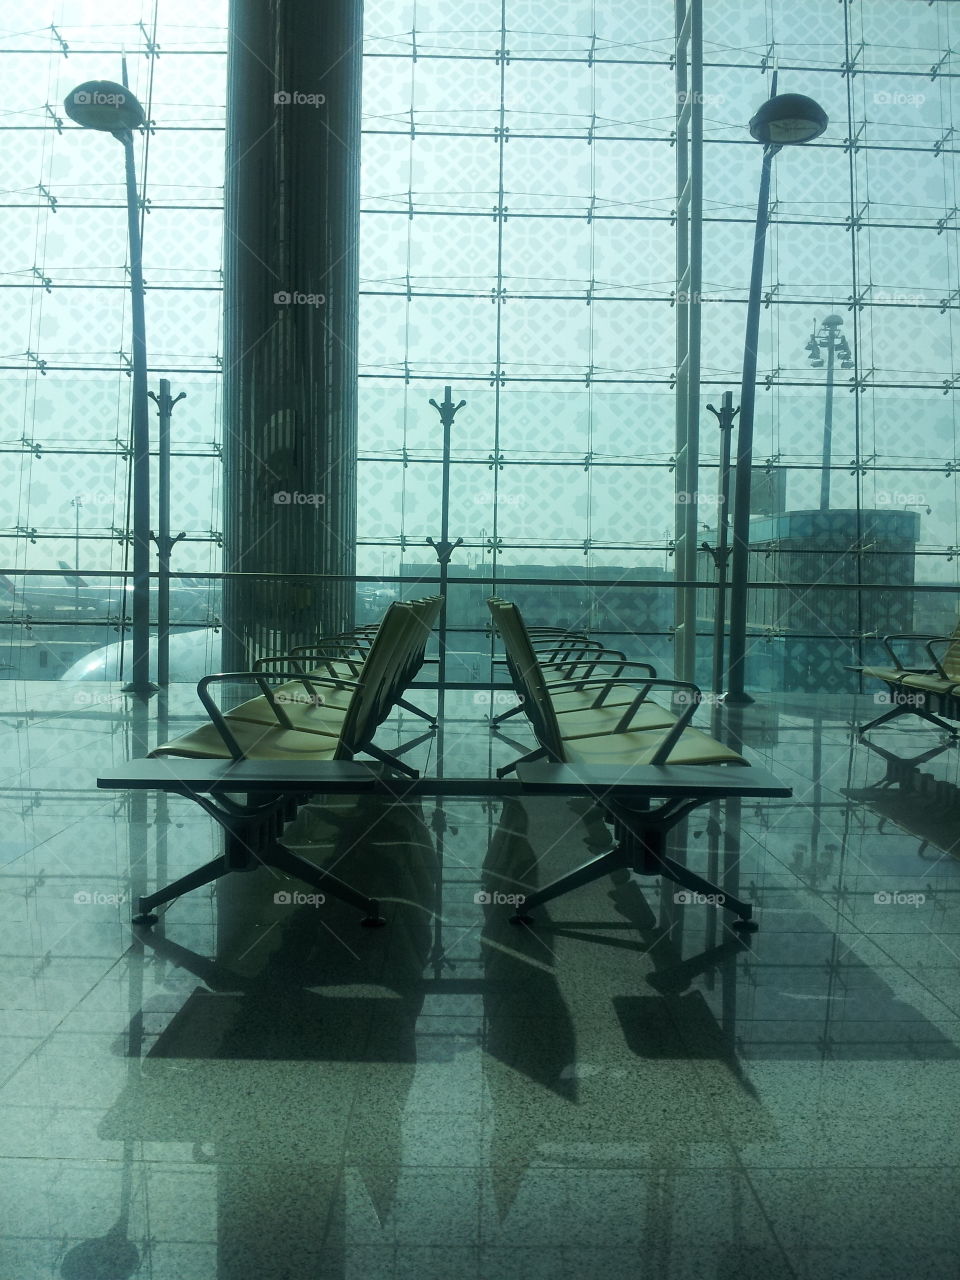 Calm at Airport. This was taken at the Dubai airport. It was unusually empty that day. Glossy floor, Unoccupied seats, Calm lighting. Best I could do was just capture the peaceful moment.